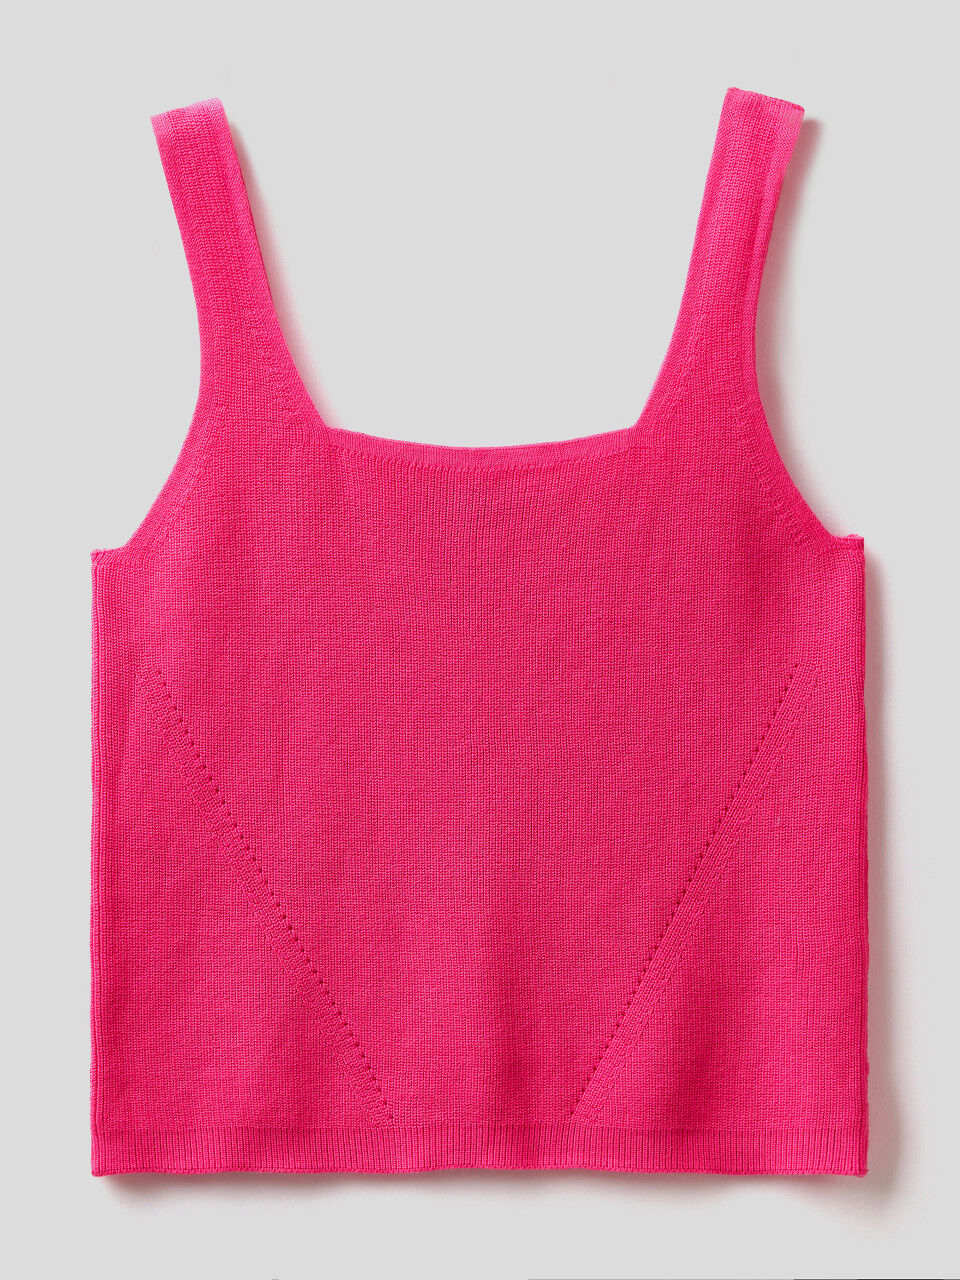 United Colors of Benetton Girls Kniited Tank Top